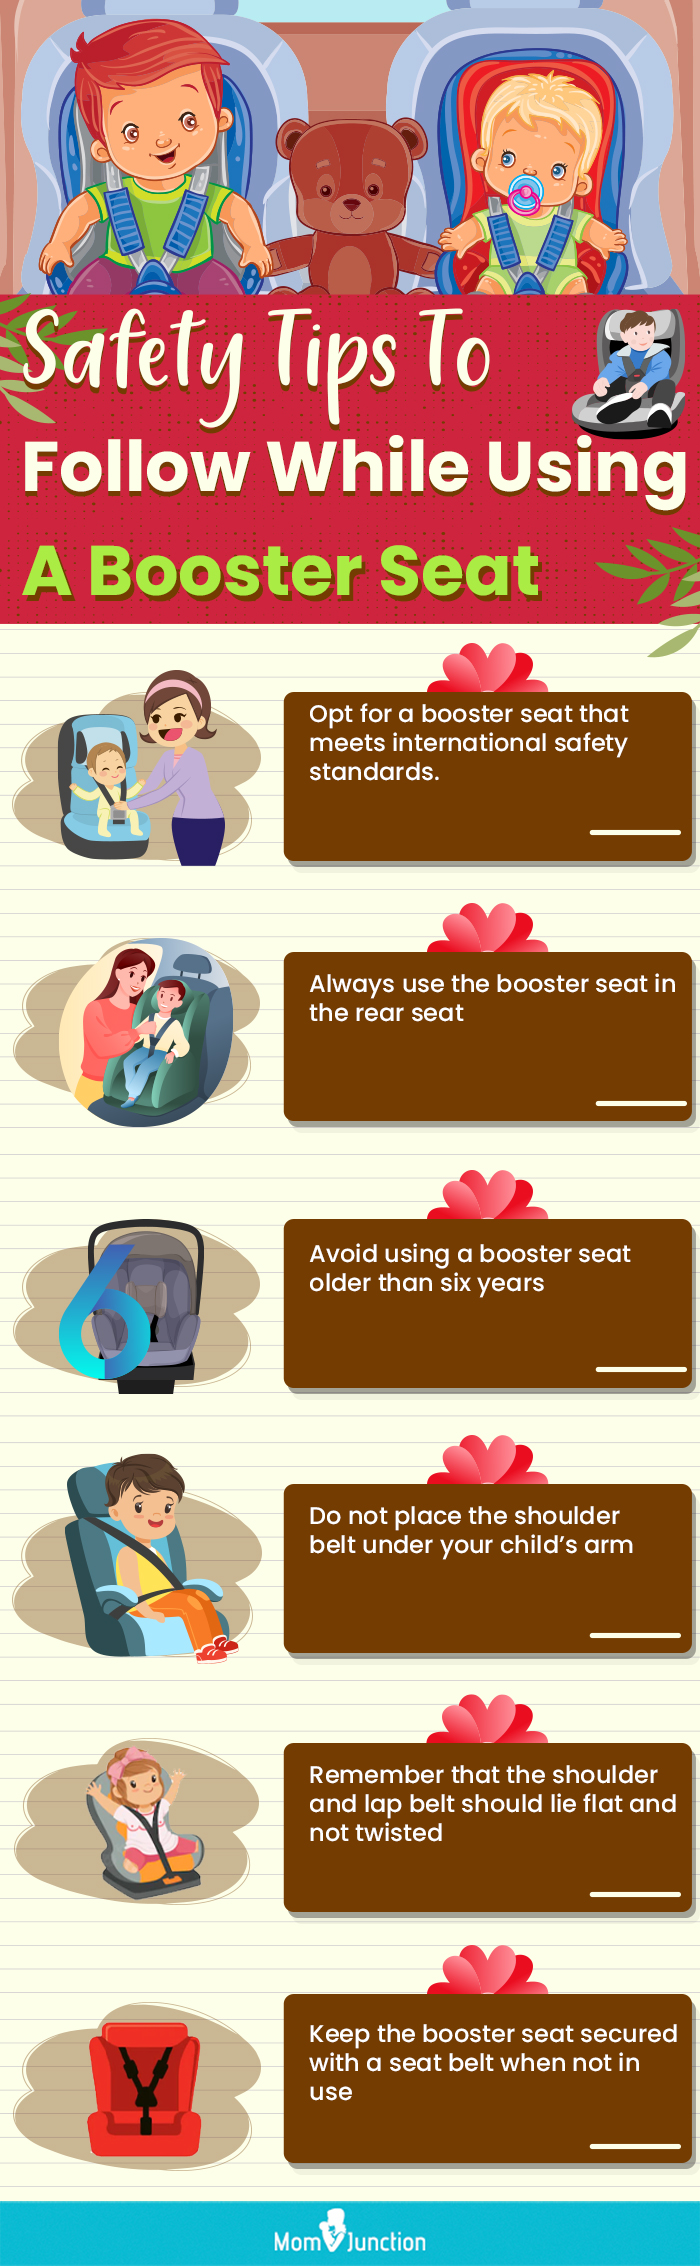 Safety Tips To Follow While Using A Booster Seat